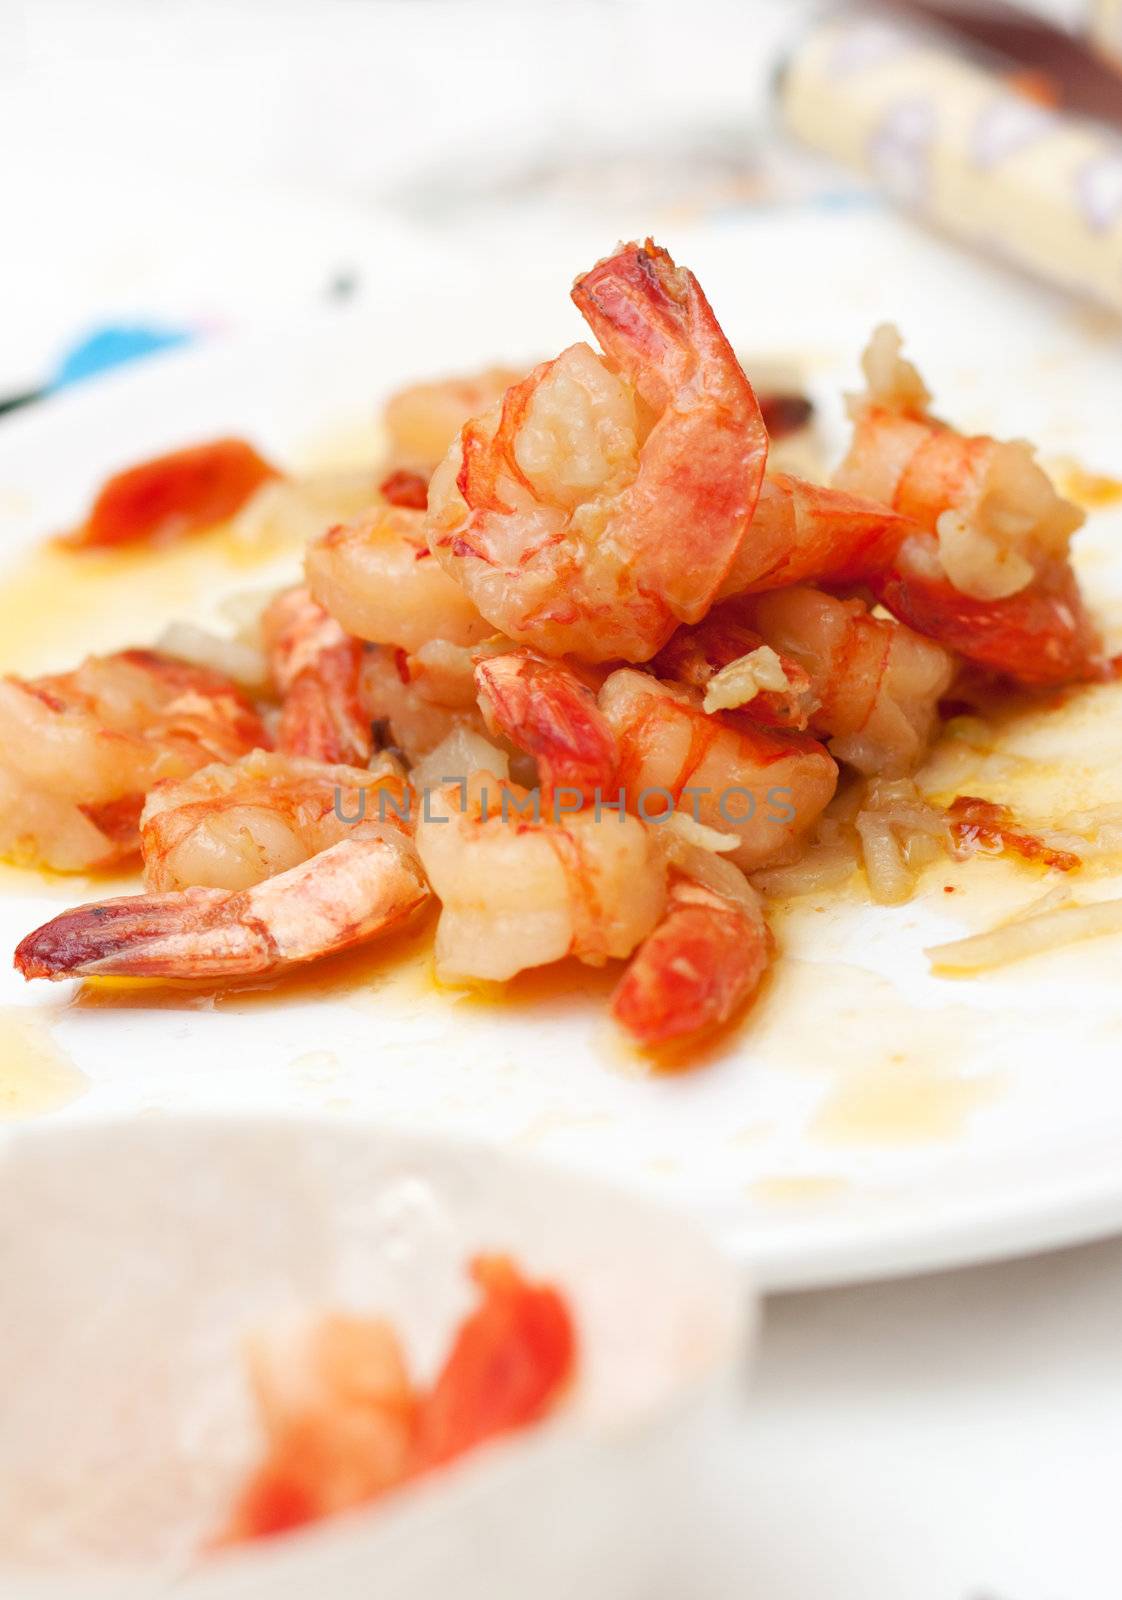 Shrimp with garlic and chilli by TristanBM